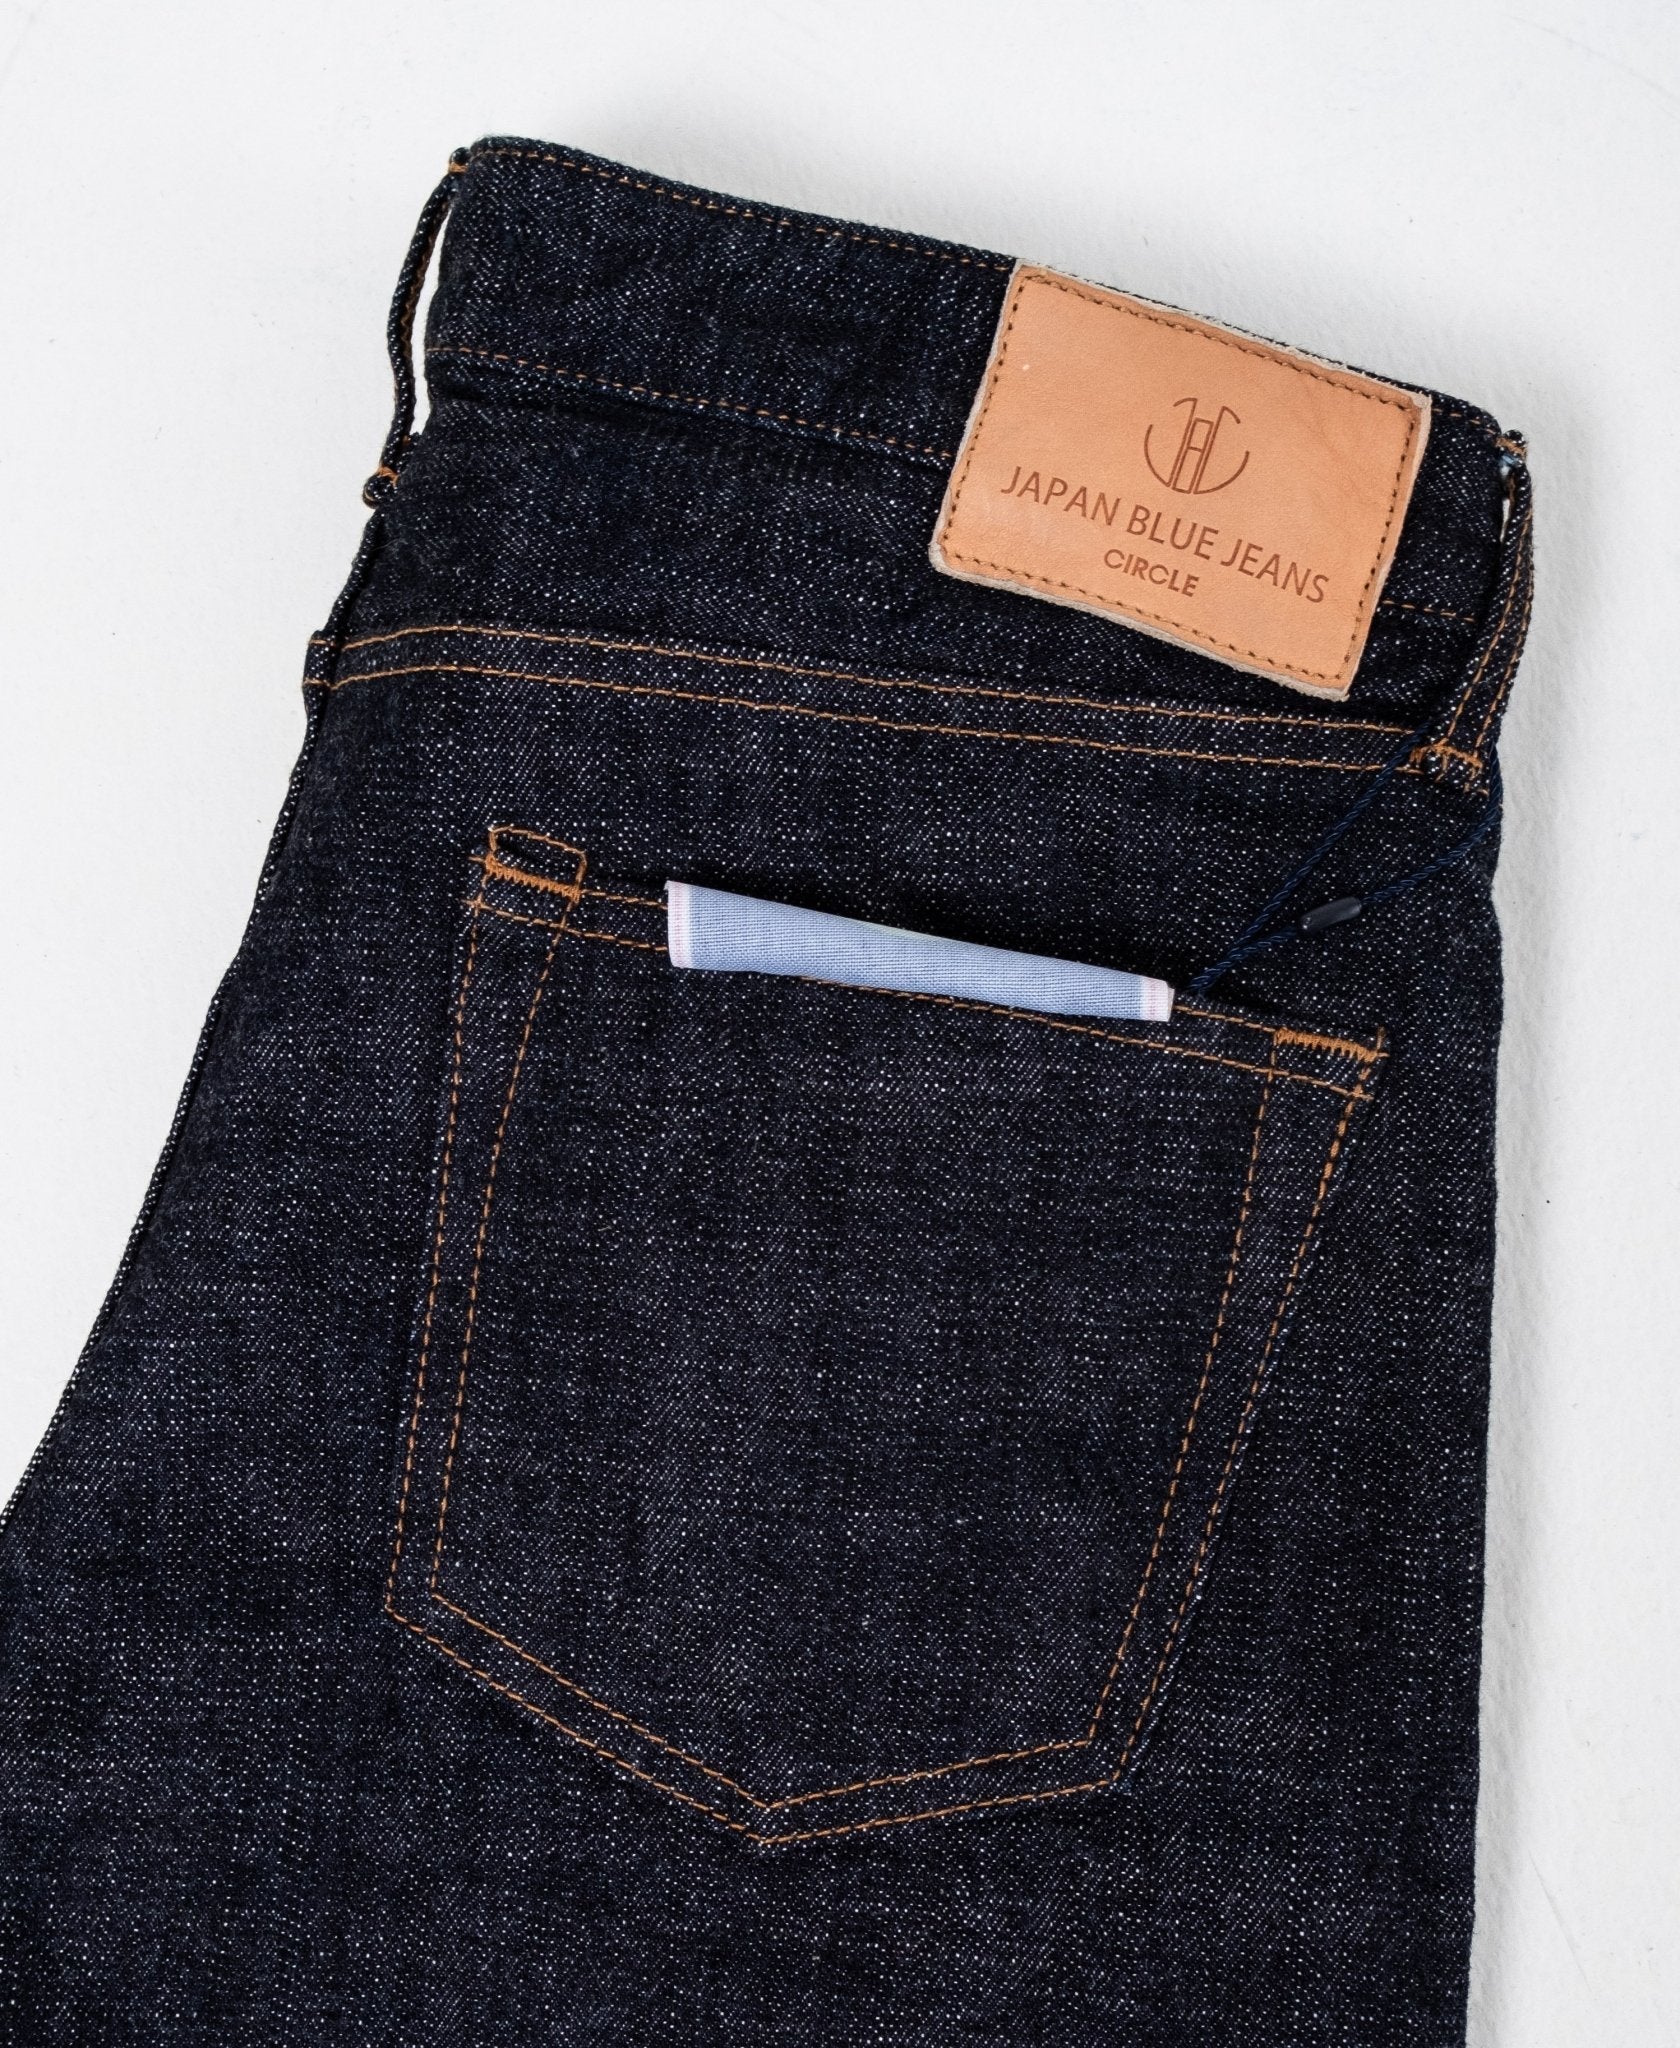 J266 Circle 16.5 oz Tapered Jeans - Meadow